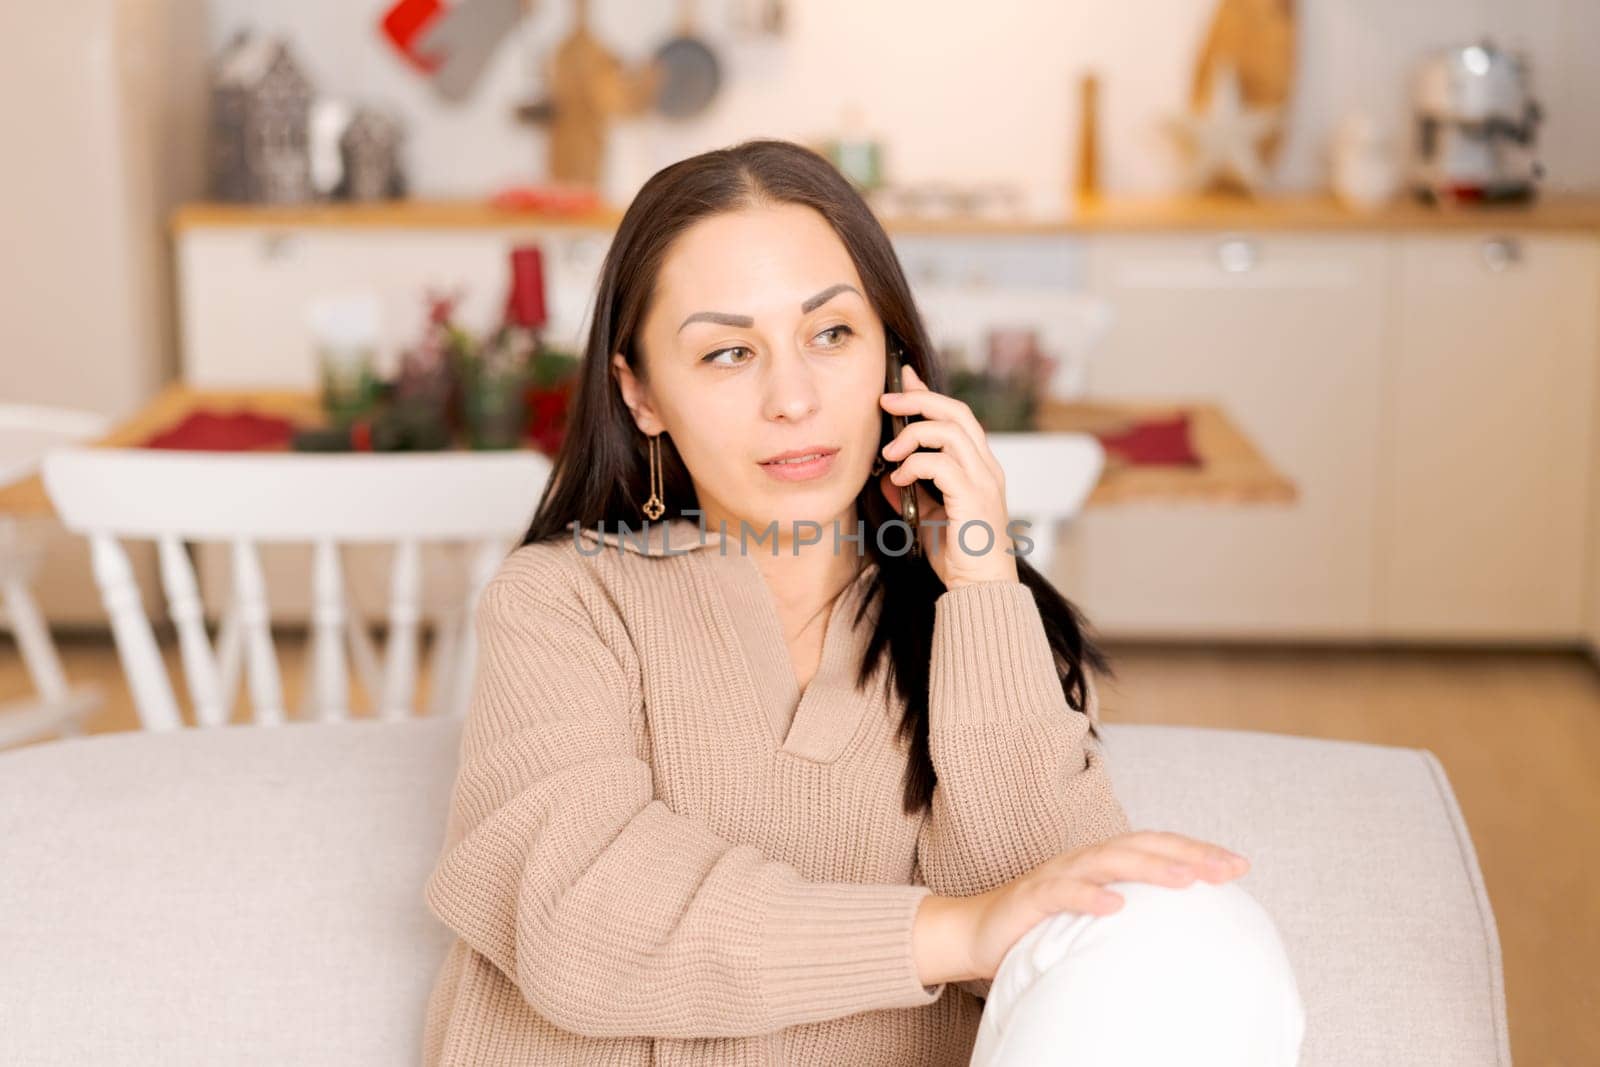 Cute woman using smartphone to call family on Christmas Eve. Talks to relatives on the phone to celebrate the holiday remotely. Communication for adults